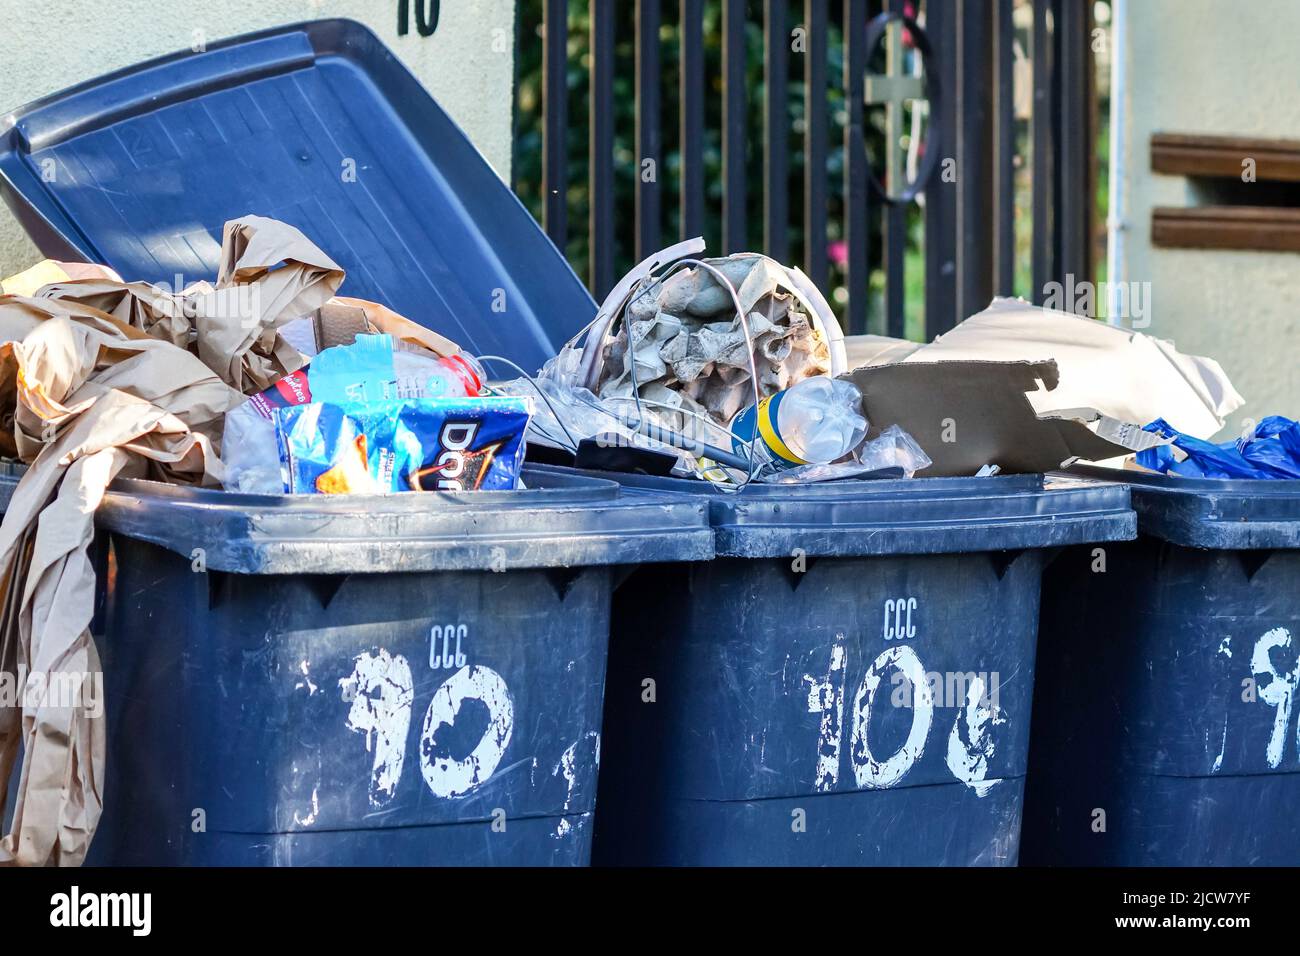 refuse bins, garbage bins, wheelie bins overflowing with trash  closeup outside an urban home in Cape Town, South Africa concept public service Stock Photo